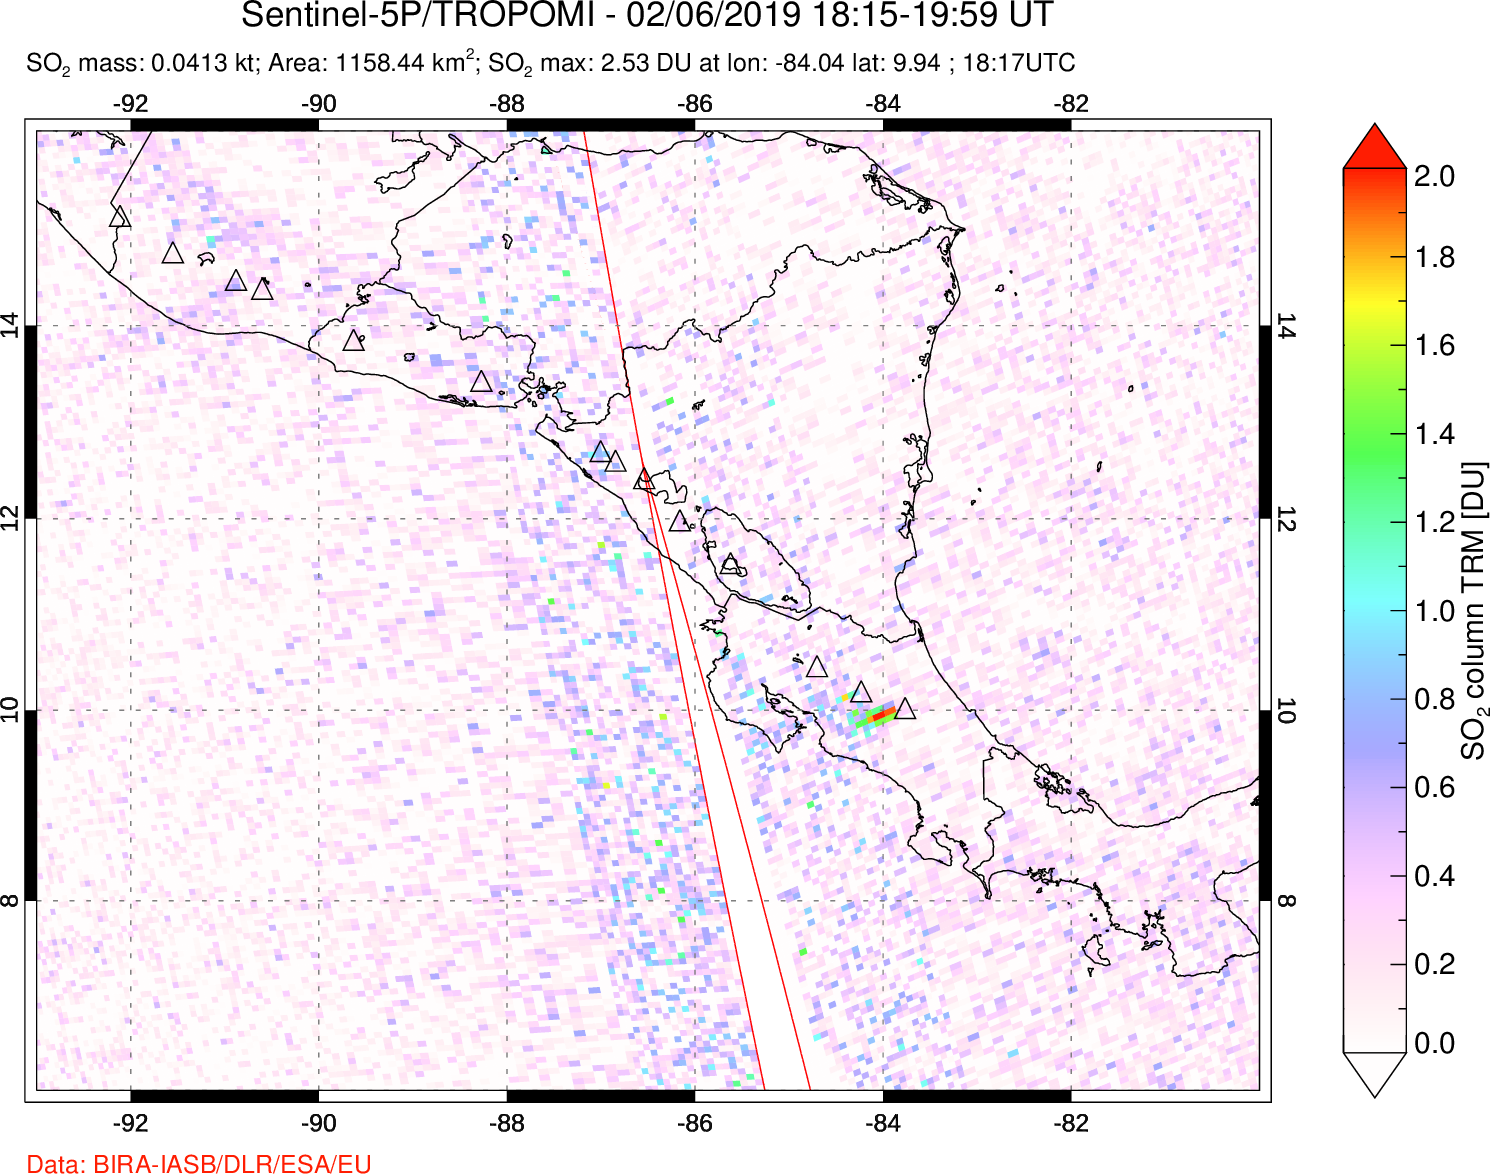 A sulfur dioxide image over Central America on Feb 06, 2019.